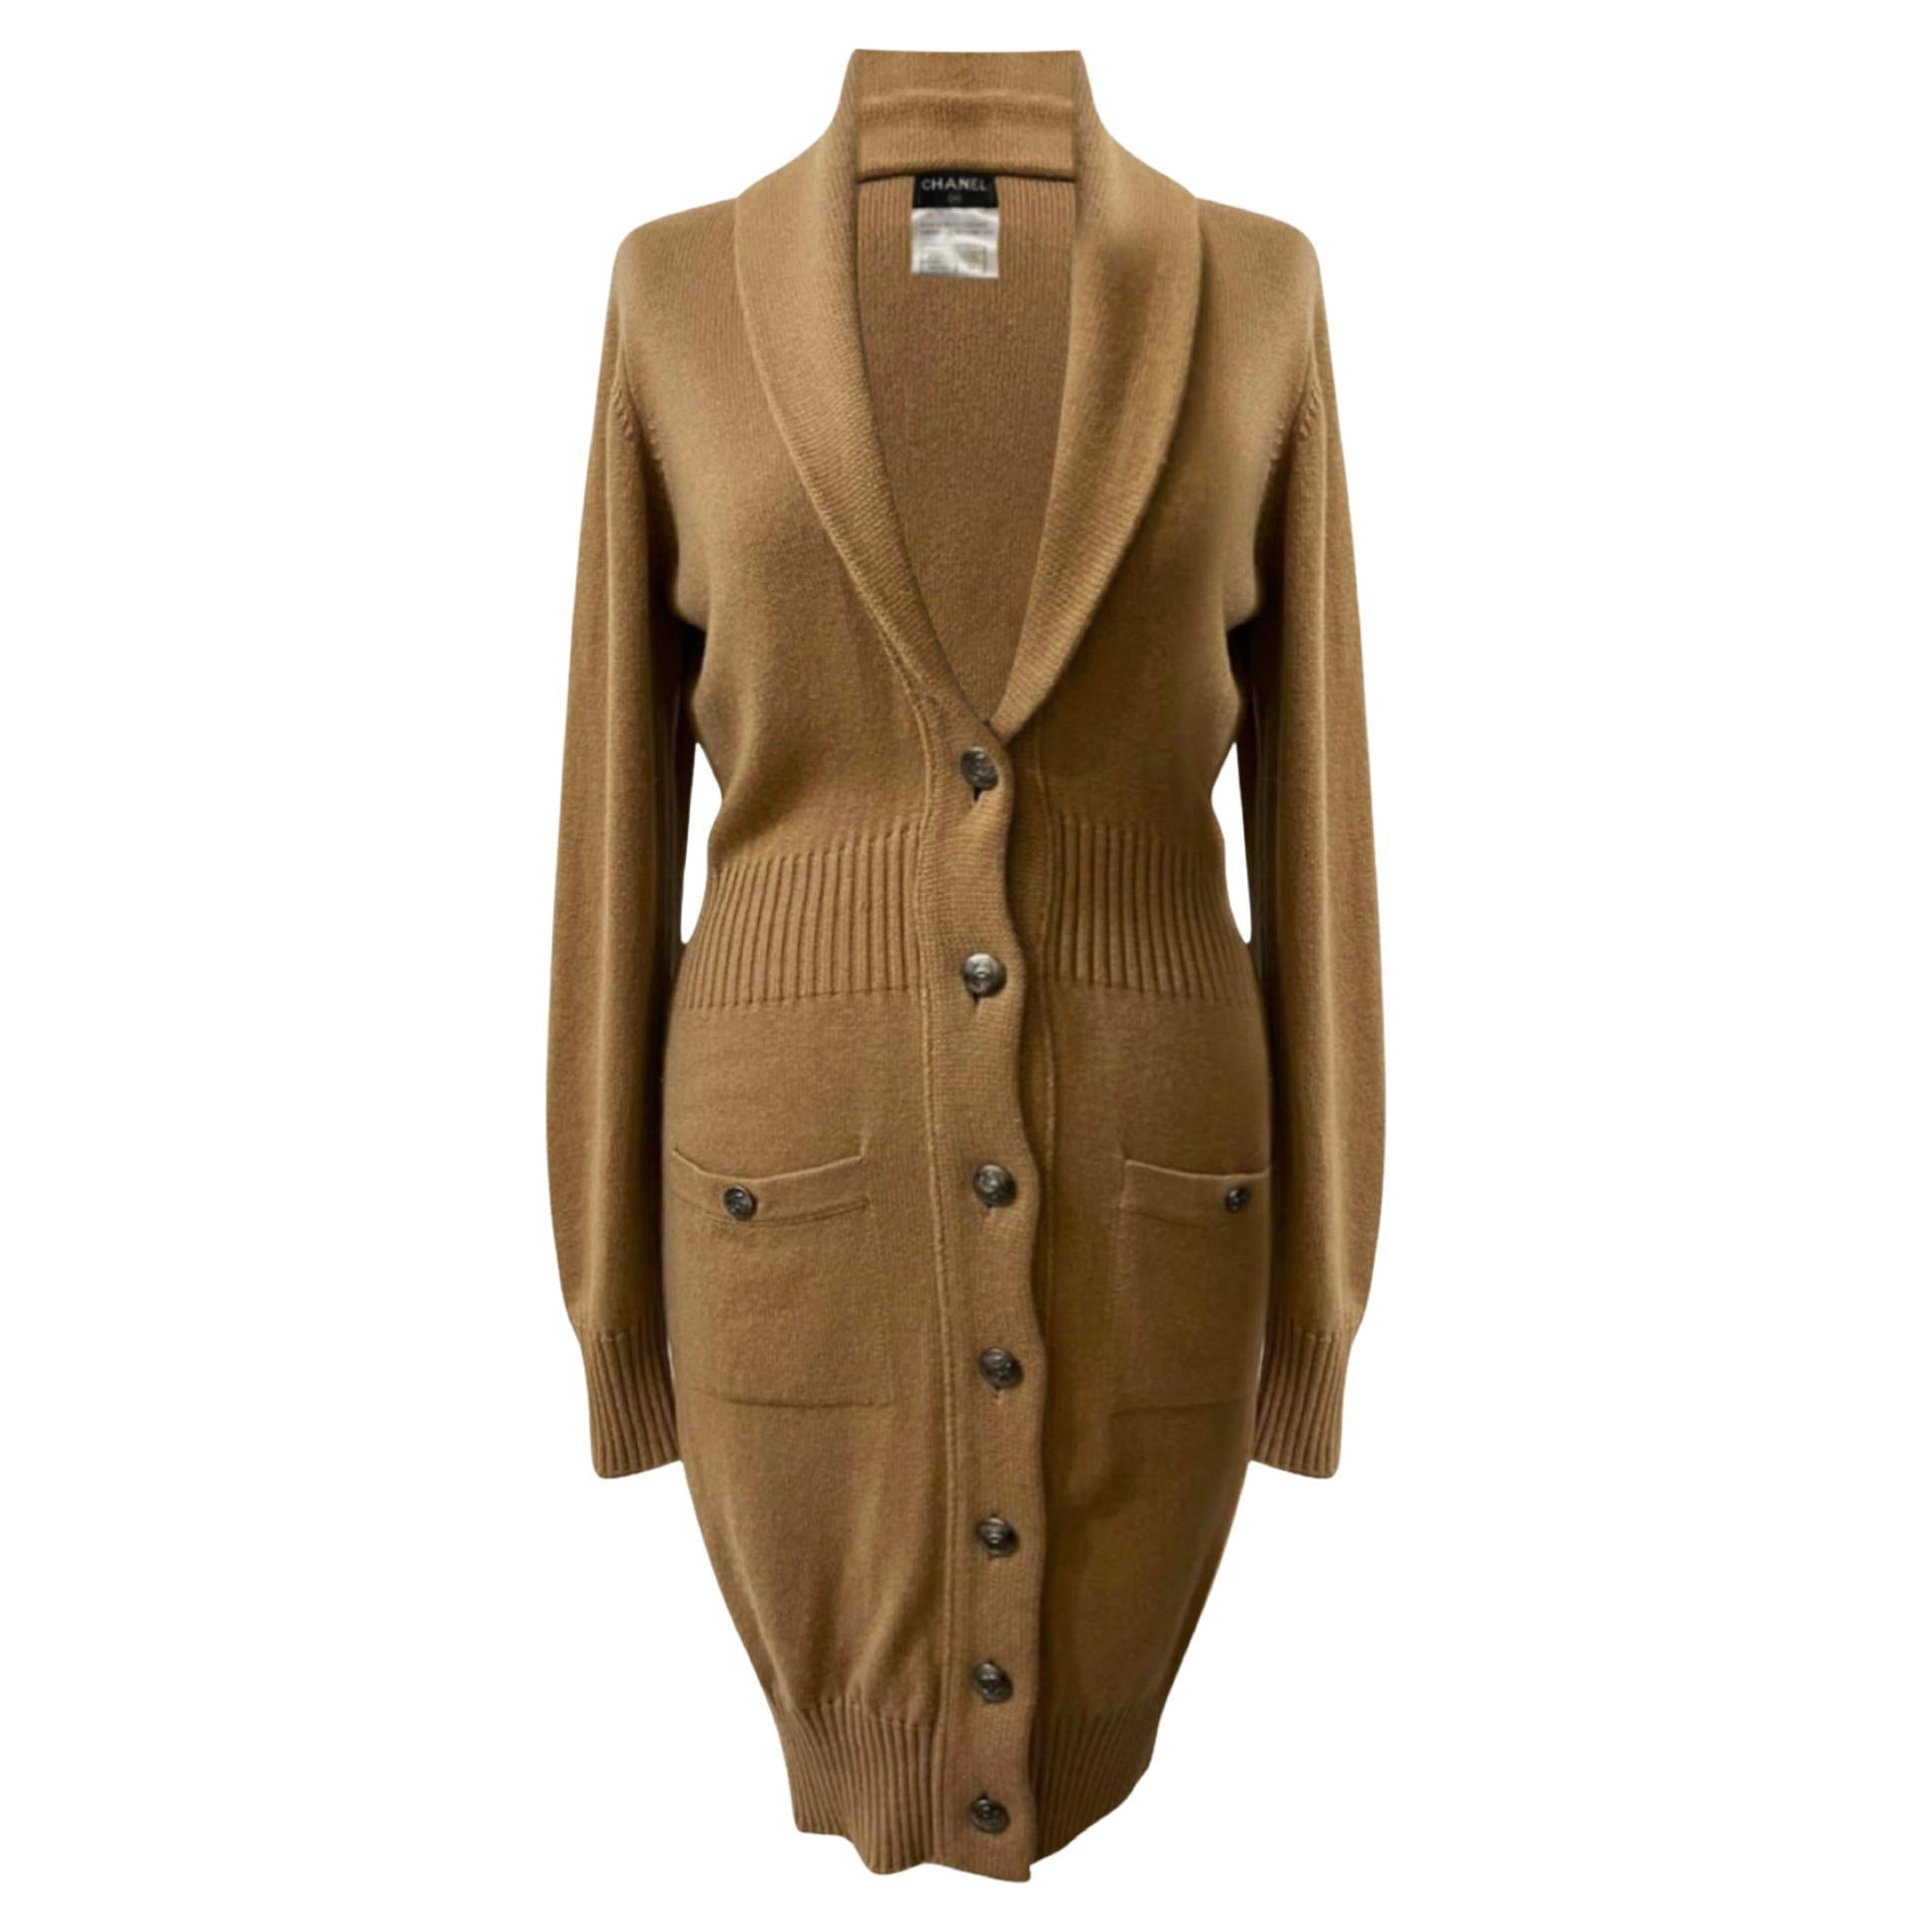 Chanel Claudia Schiffer Style Camel Cashmere Cardi Coat For Sale